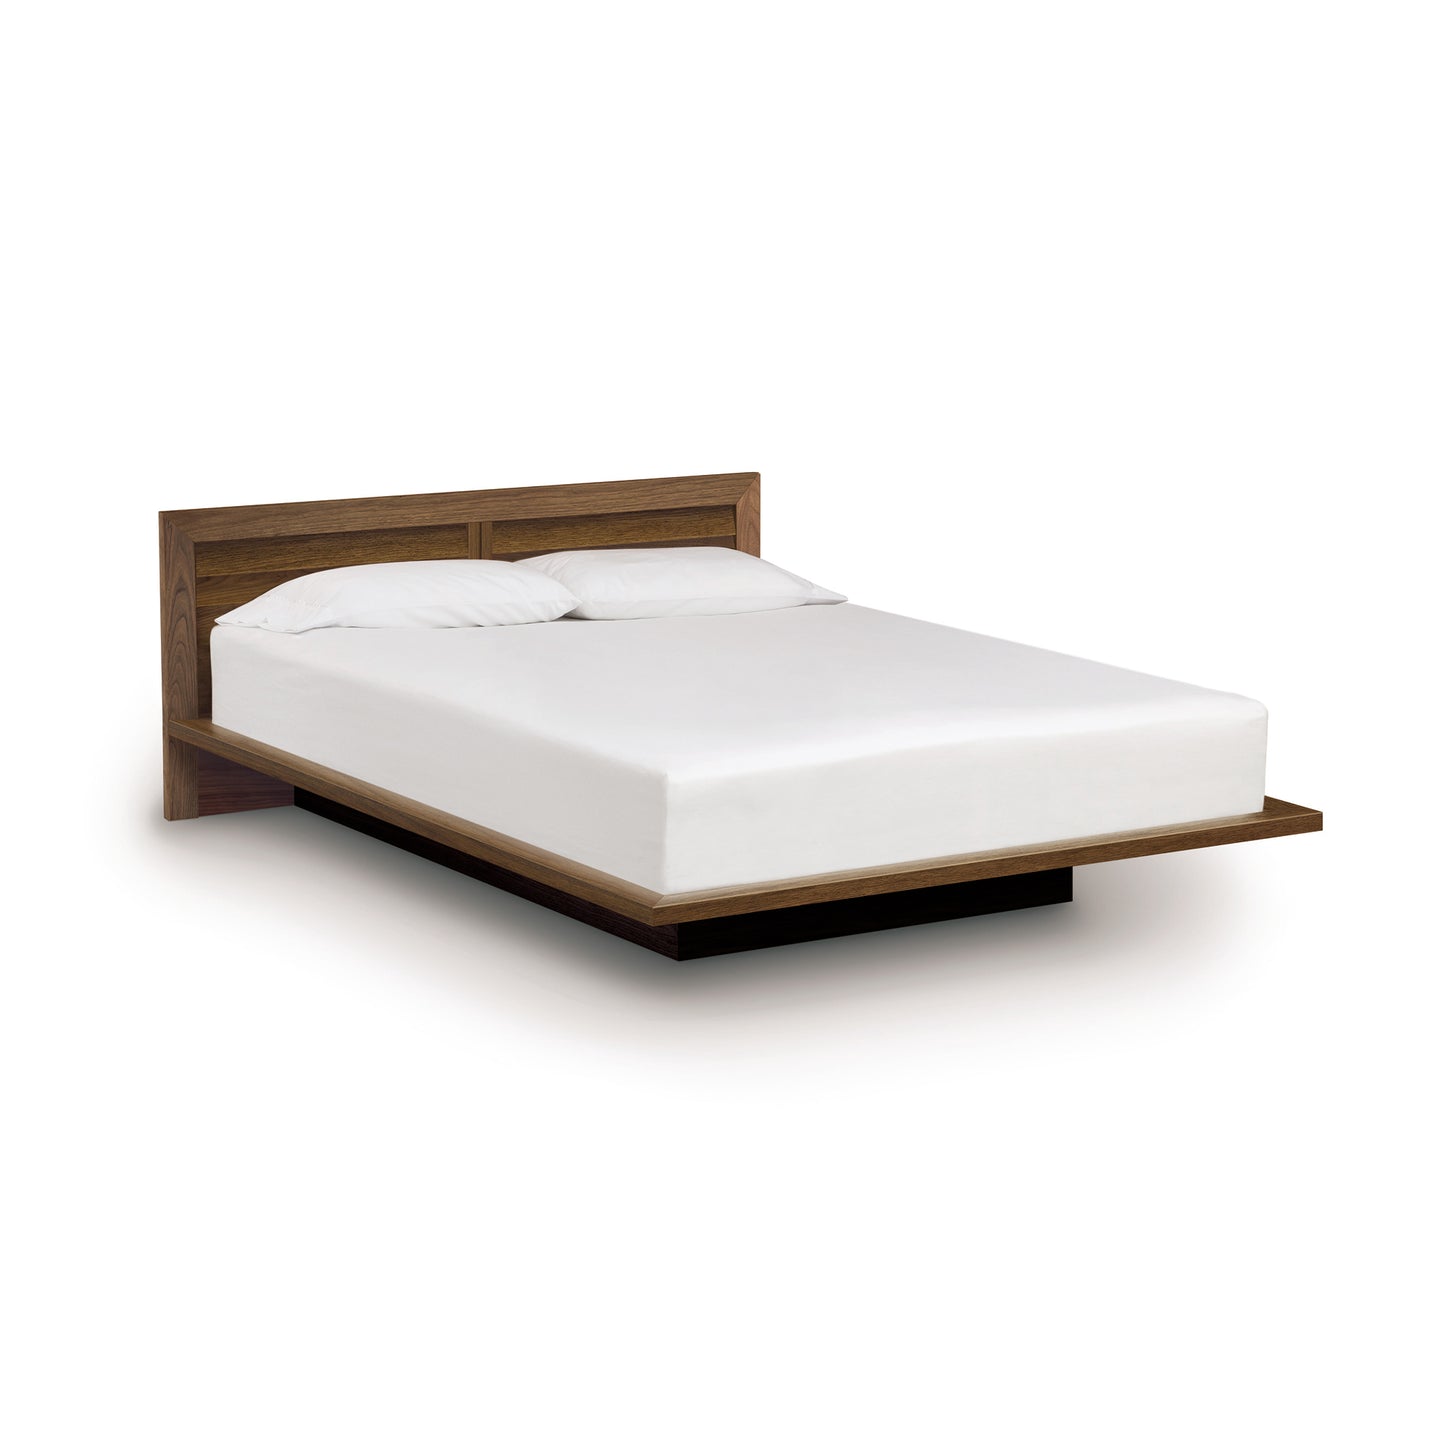 A Copeland Furniture Moduluxe Platform Bed with Clapboard Headboard - 29" Series, with a white mattress on an isolated background.